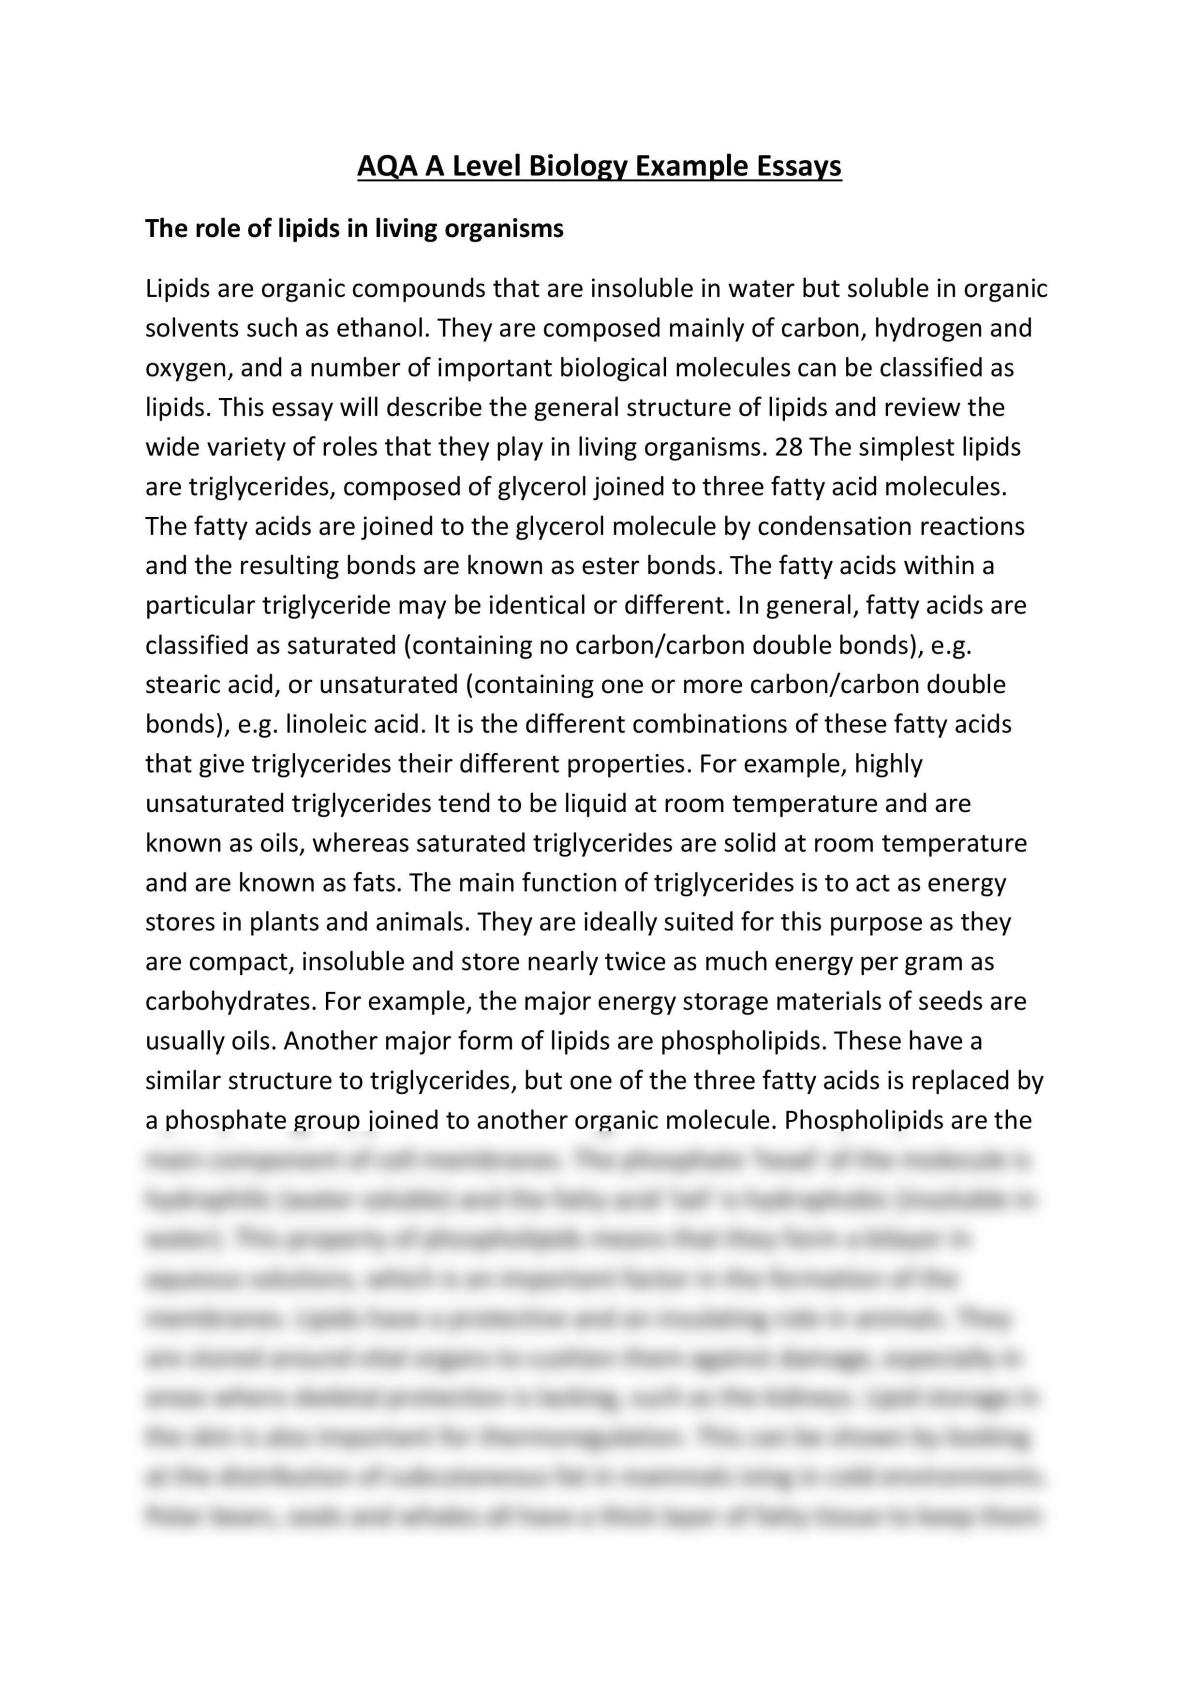 importance of diffusion biology essay